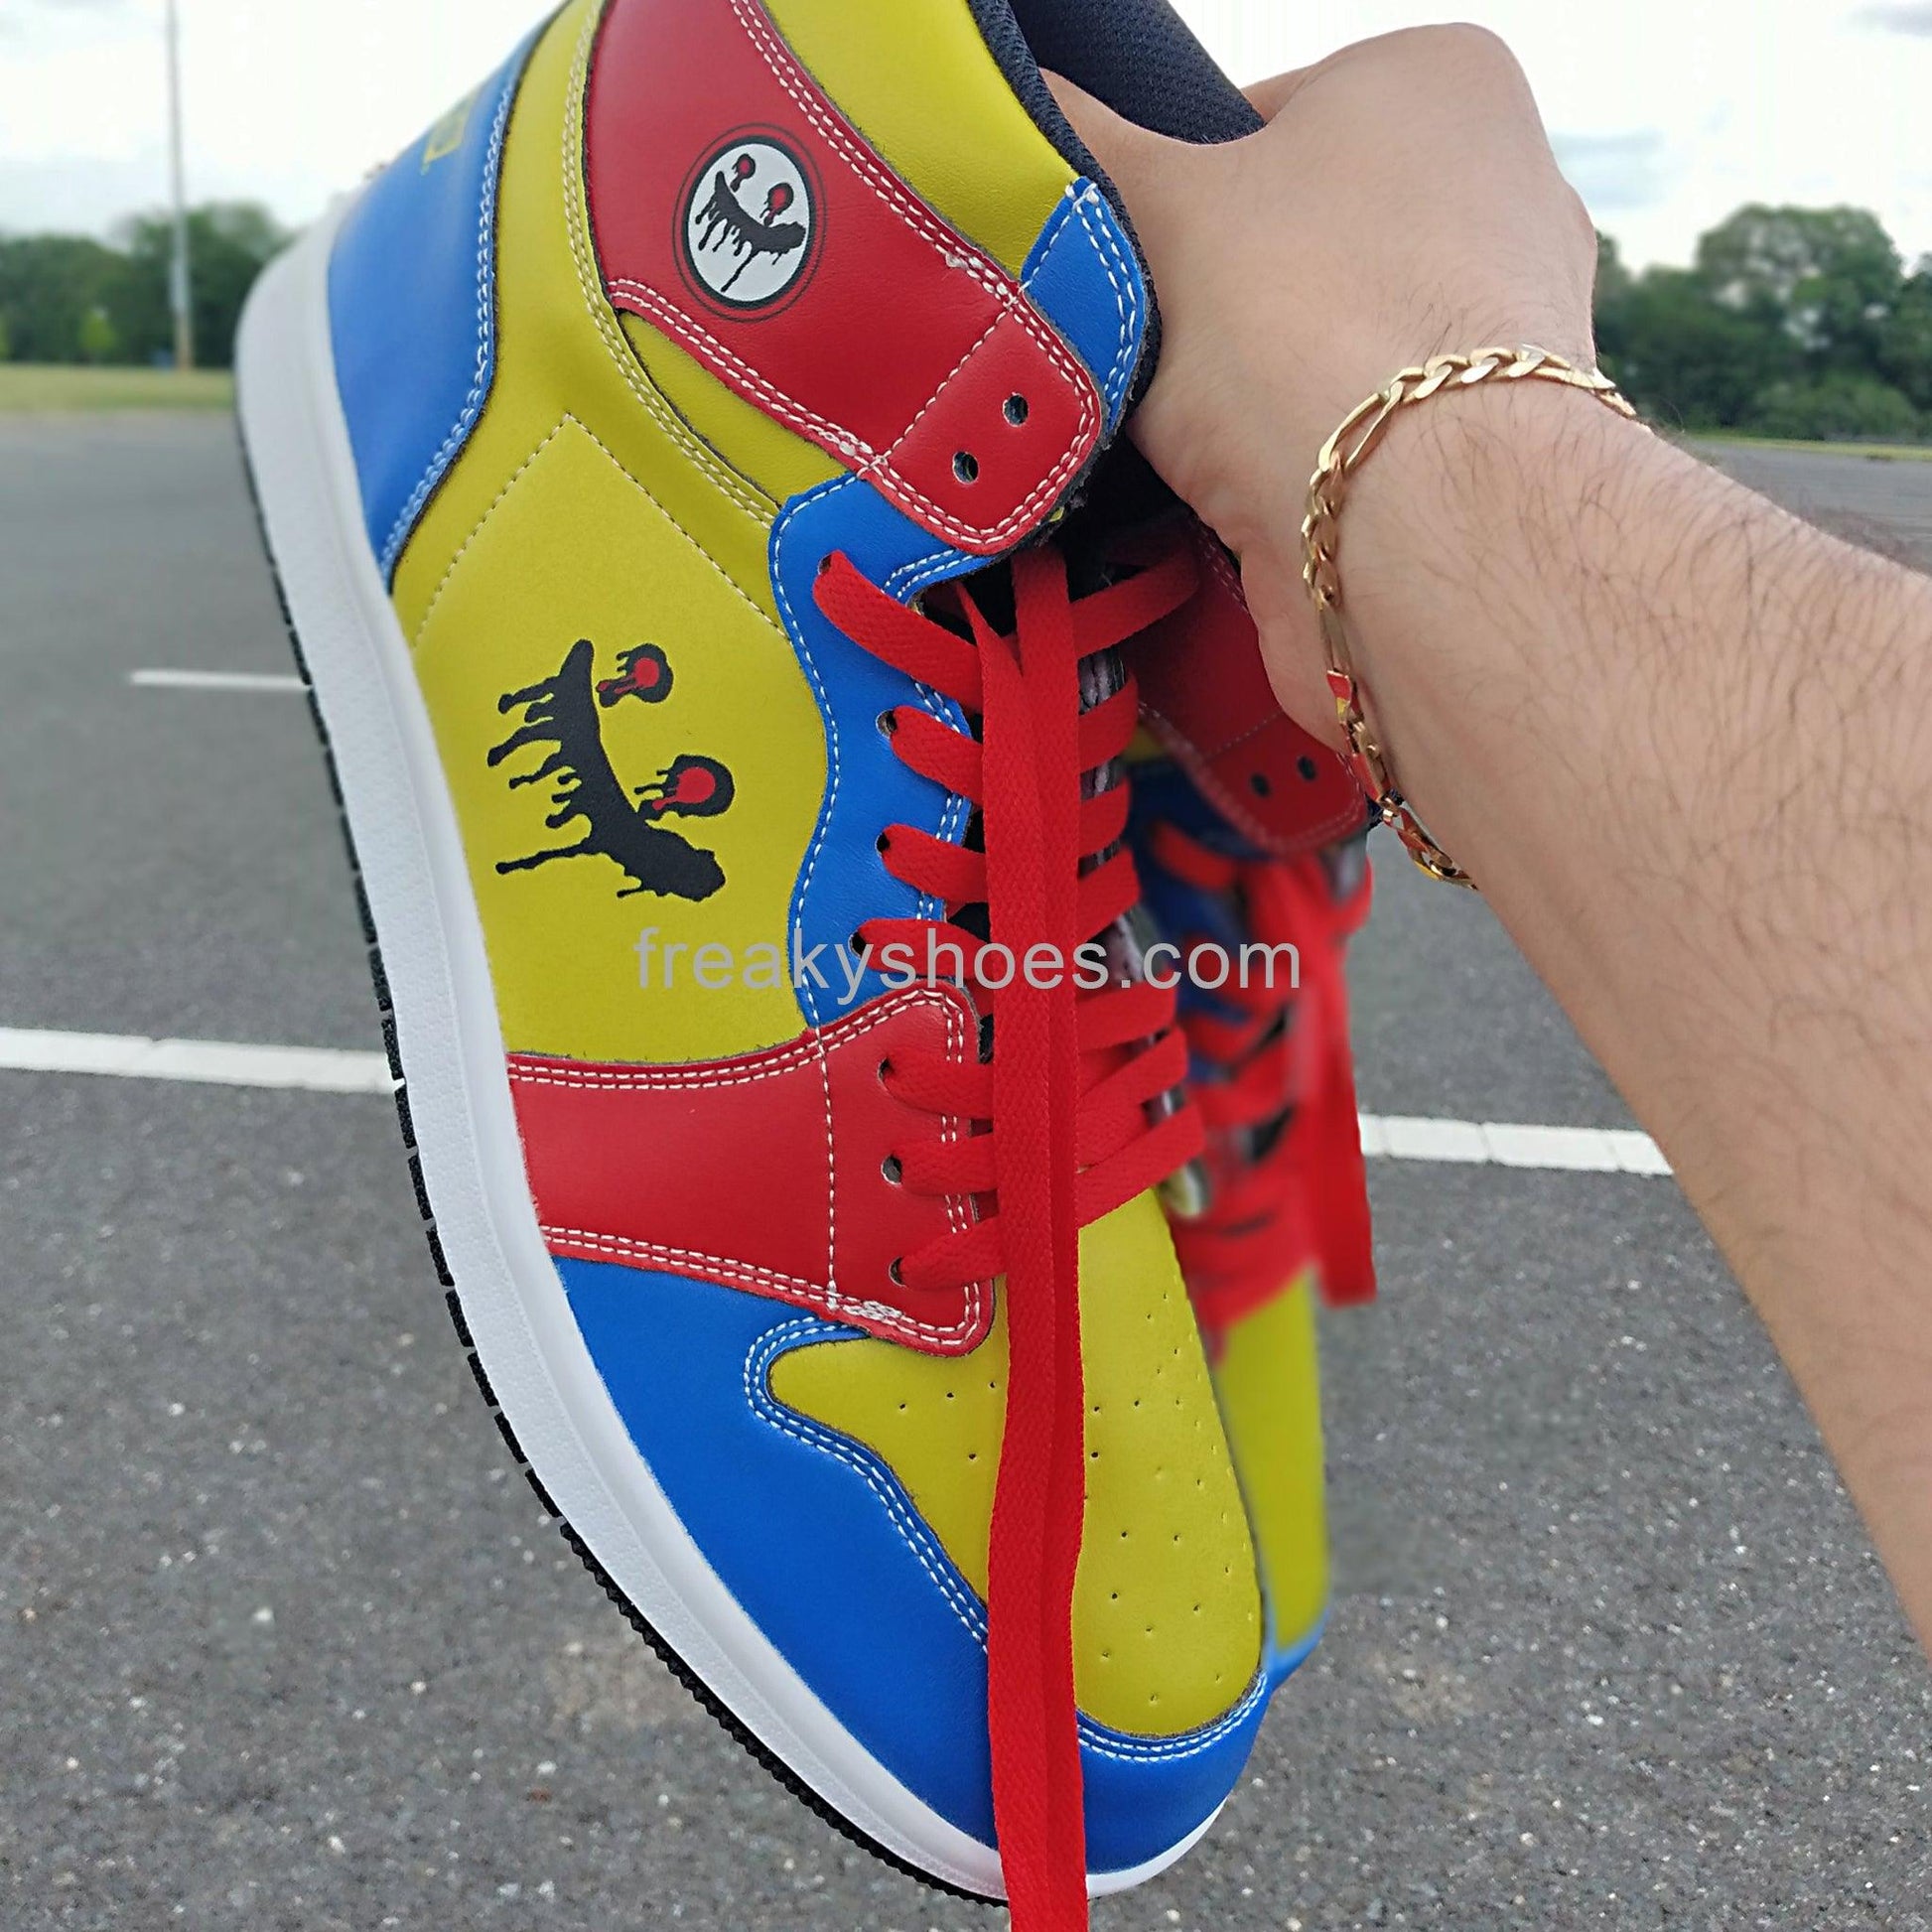 Freaky Shoes Blue Yellow High Tops - Shoes